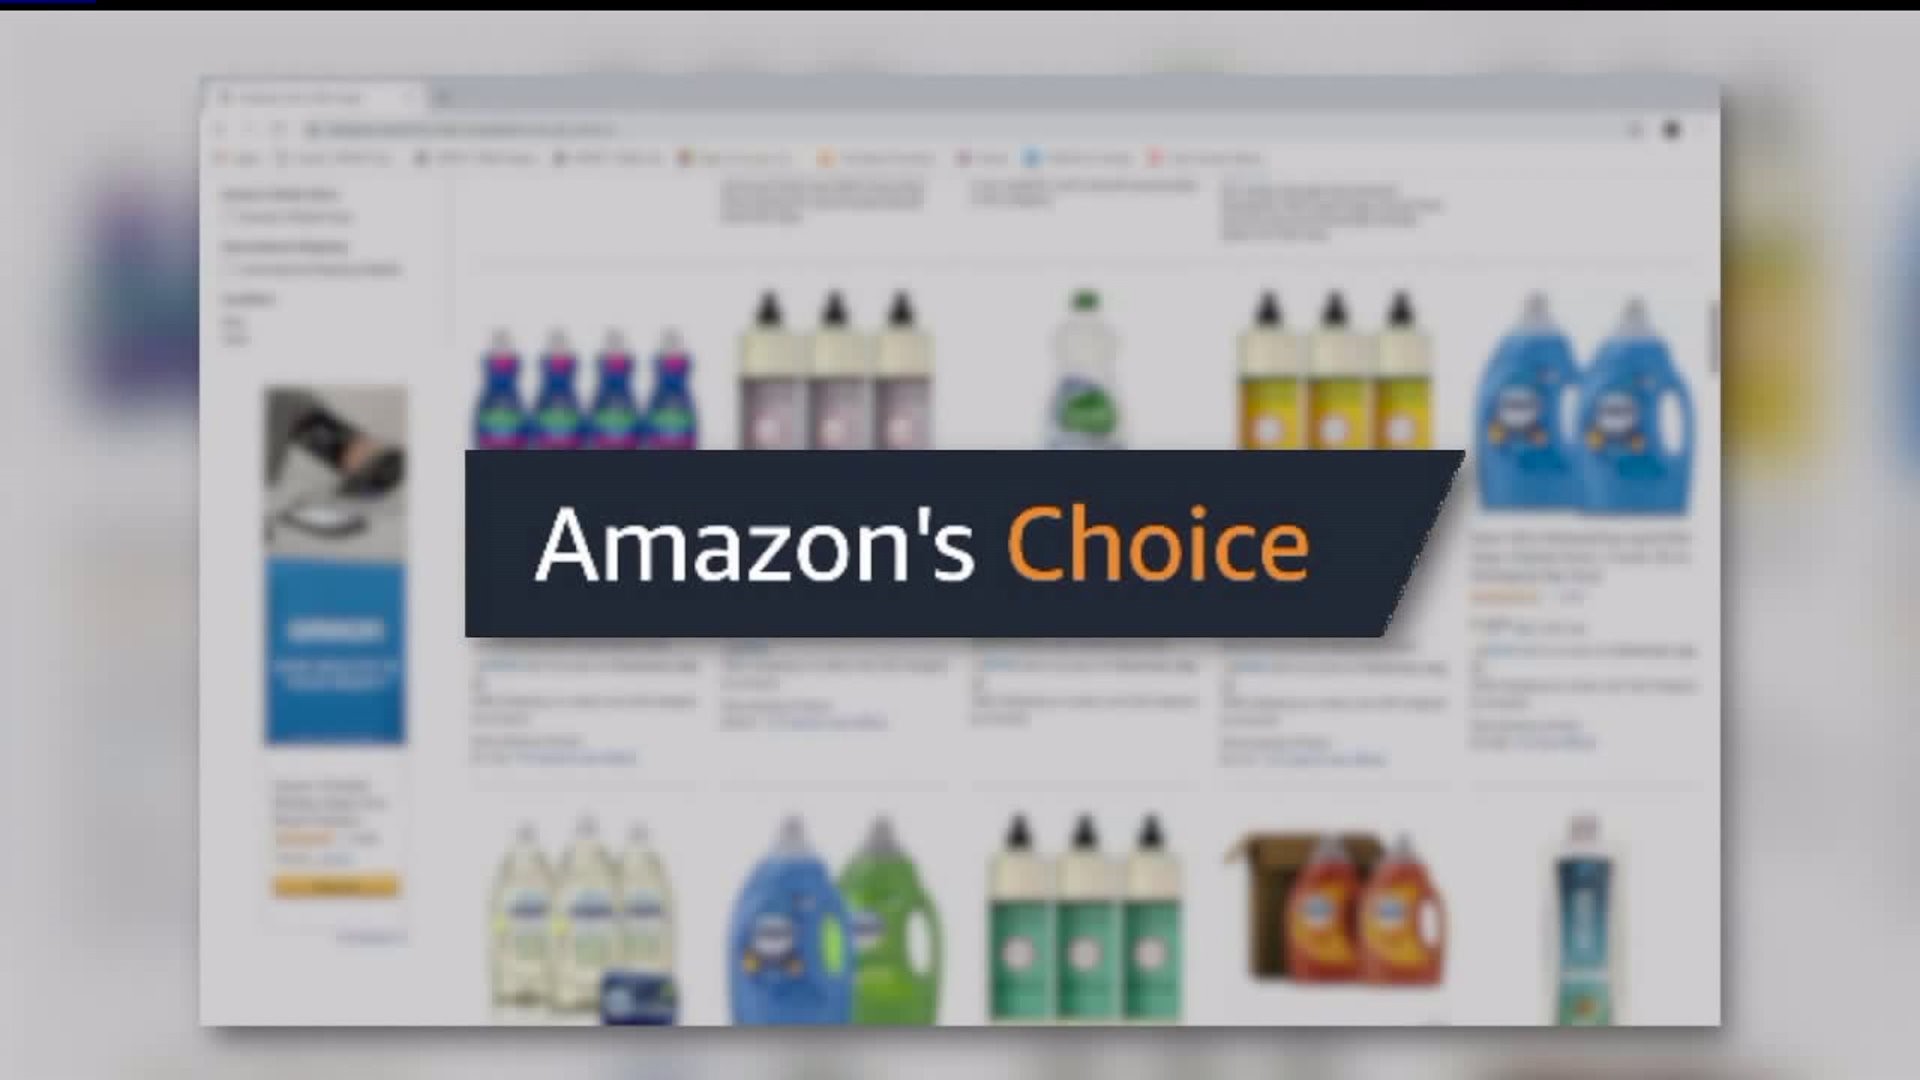 FOX43 Finds Out: Amazon tells us what makes a product "Amazon`s choice"